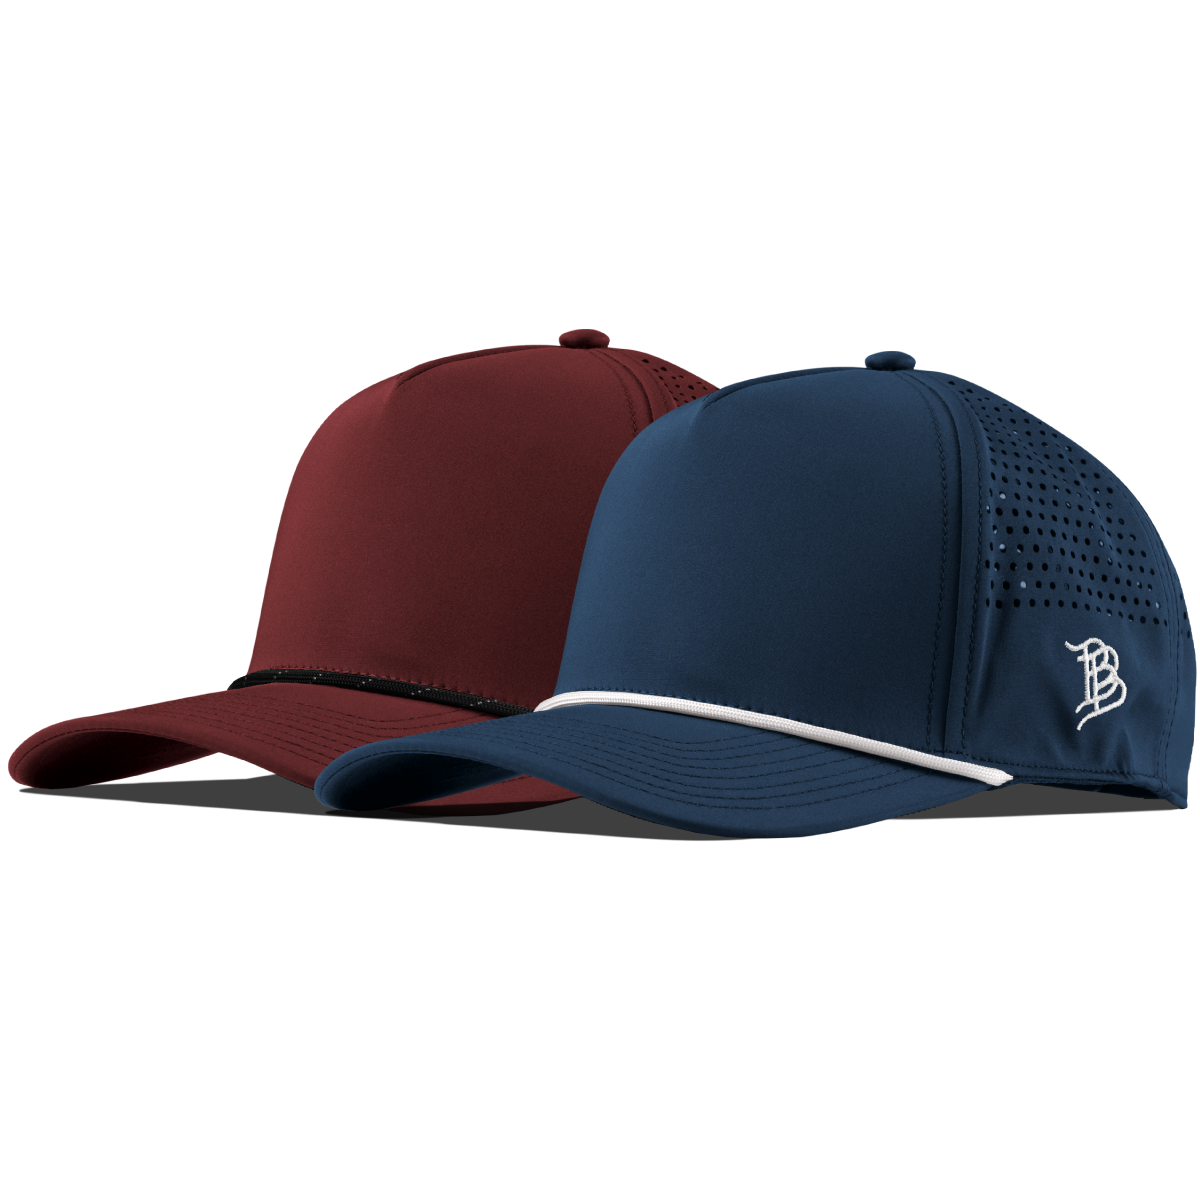 Bare Curved 5 Panel Performance 2-Pack Maroon/Black + Orion/White